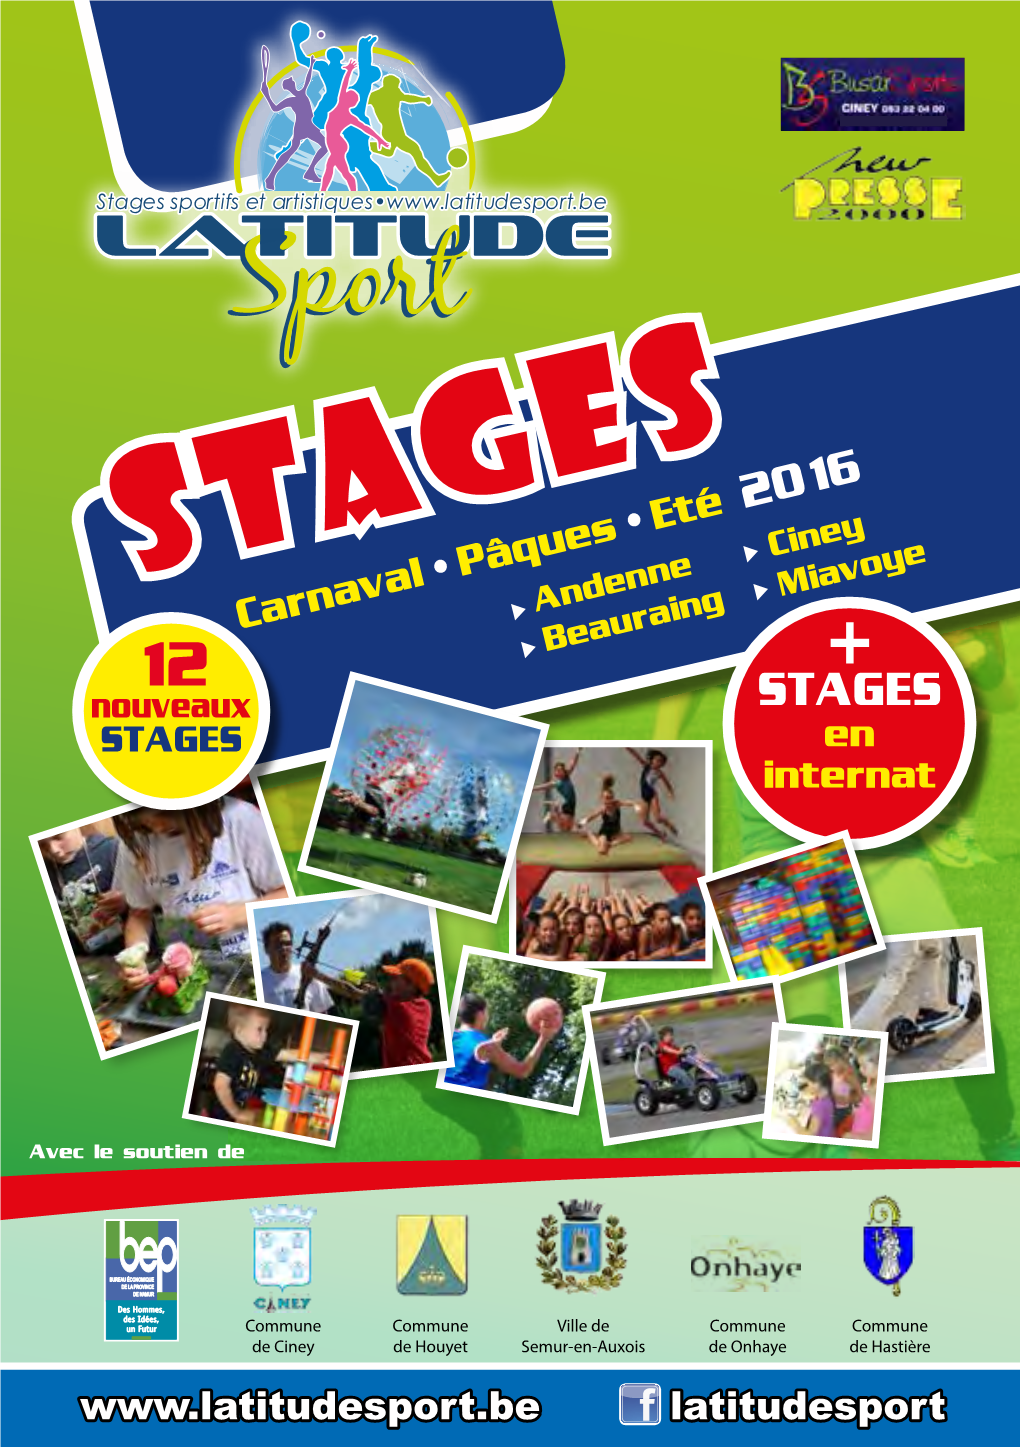 STAGES • Miavoye Carnaval Andenne 12 Beauraing + Nouveaux STAGES STAGES En Internat